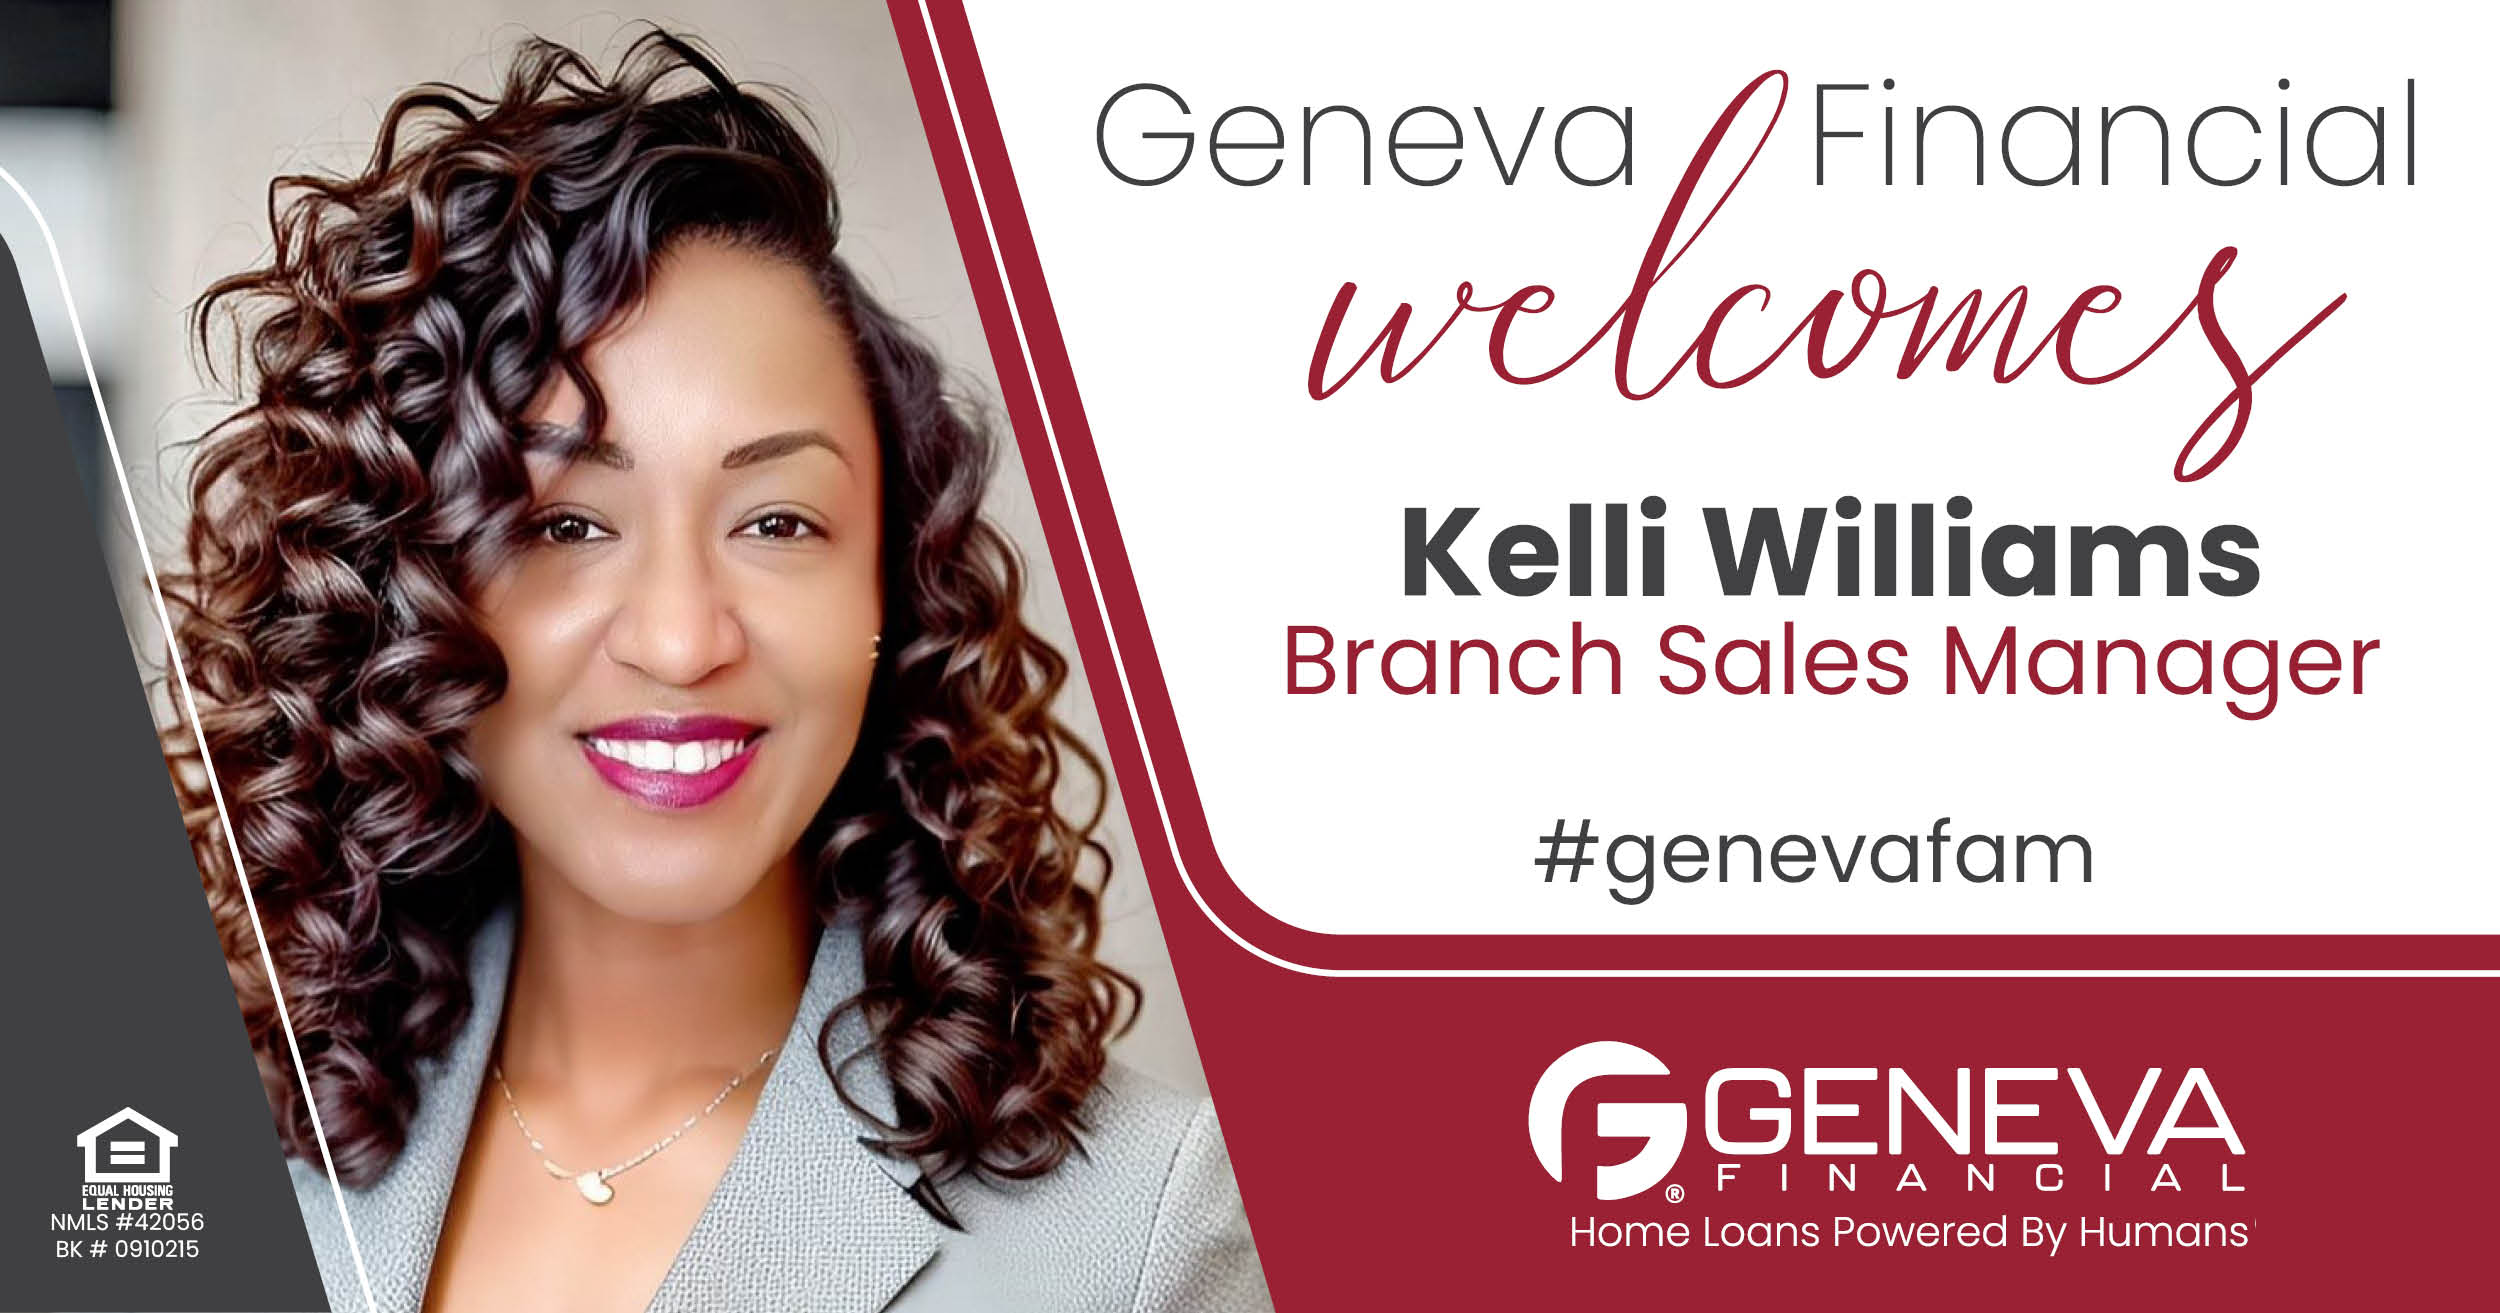 Geneva Financial Welcomes New Branch Sales Manager Kelli Williams to Waldorf, Maryland – Home Loans Powered by Humans®.